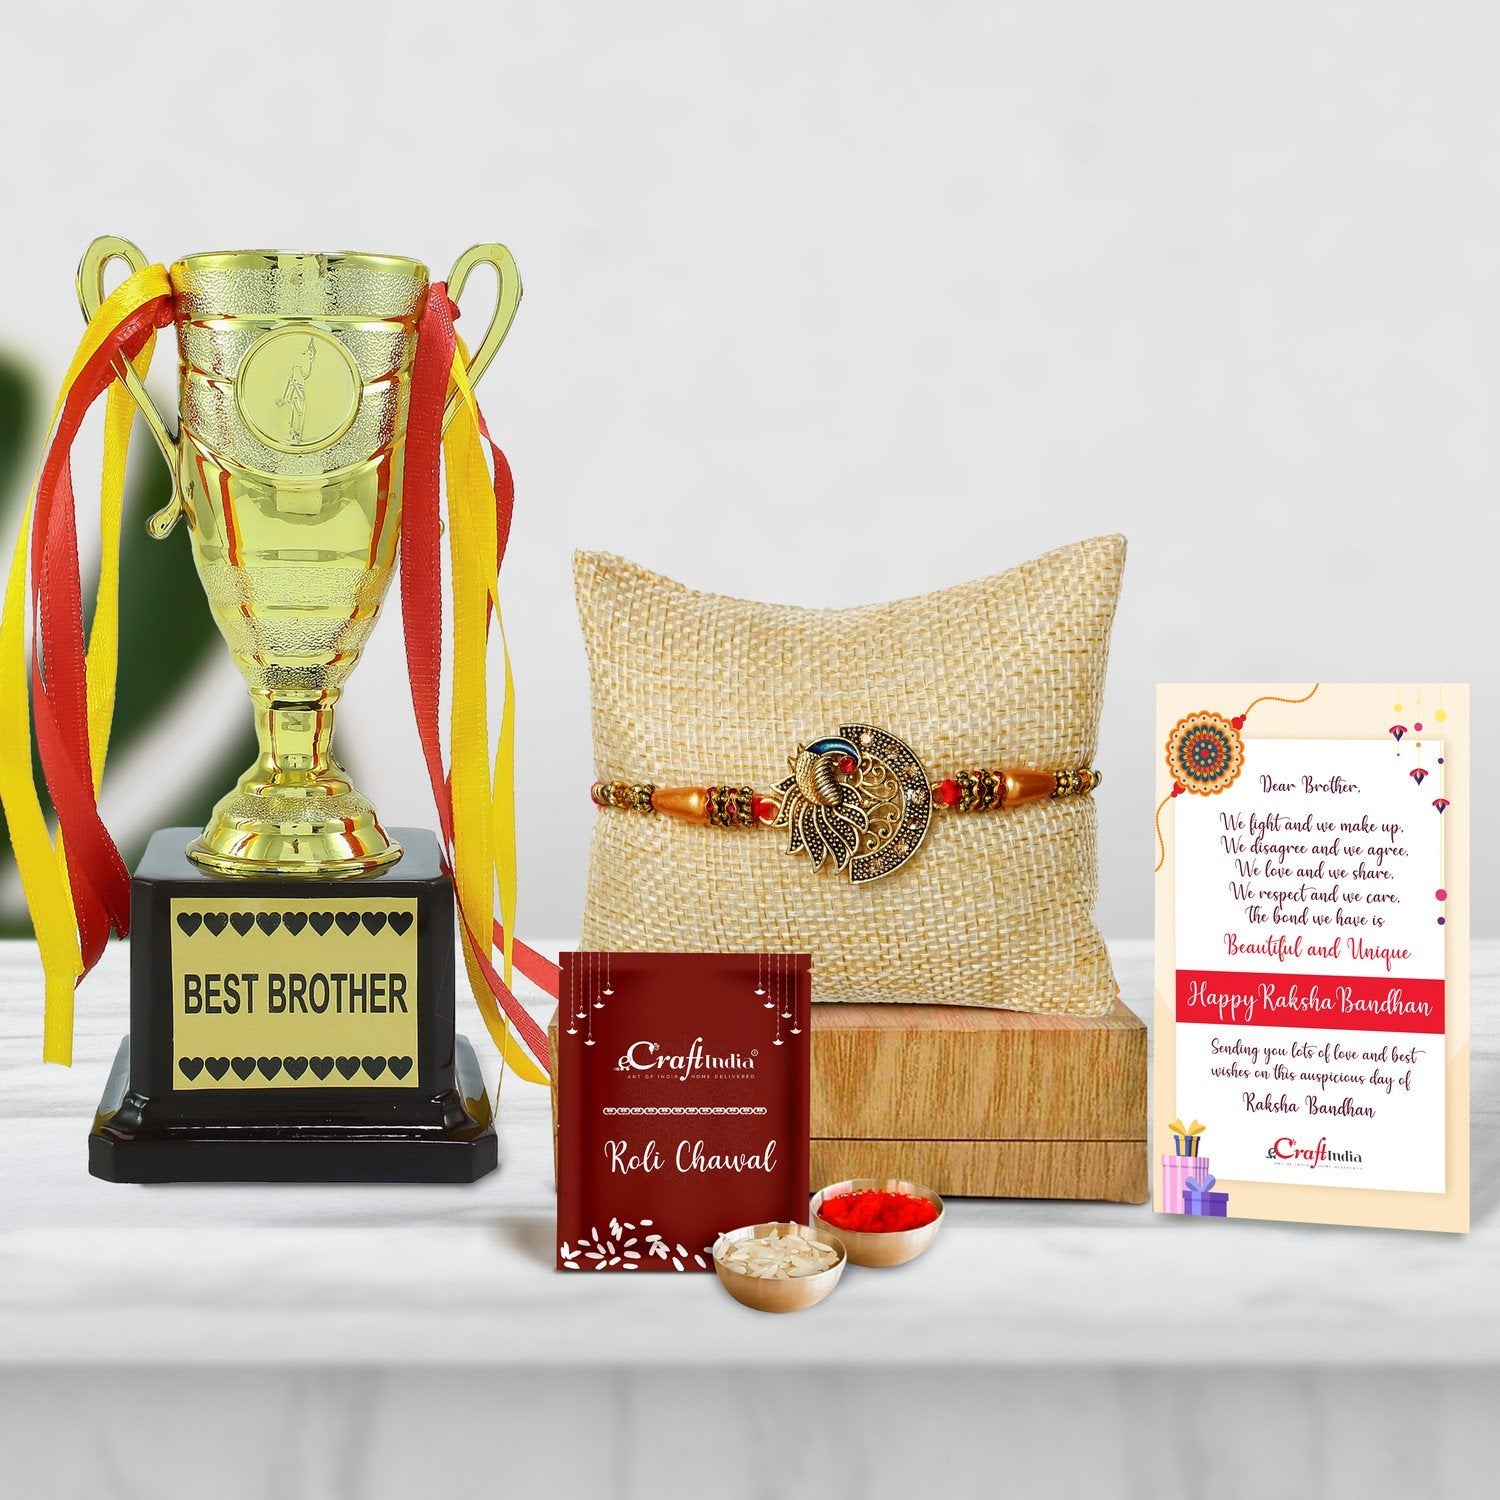 Designer Peacock Rakhi with Best Brother Trophy and Roli Chawal Pack, Best Wishes Greeting Card